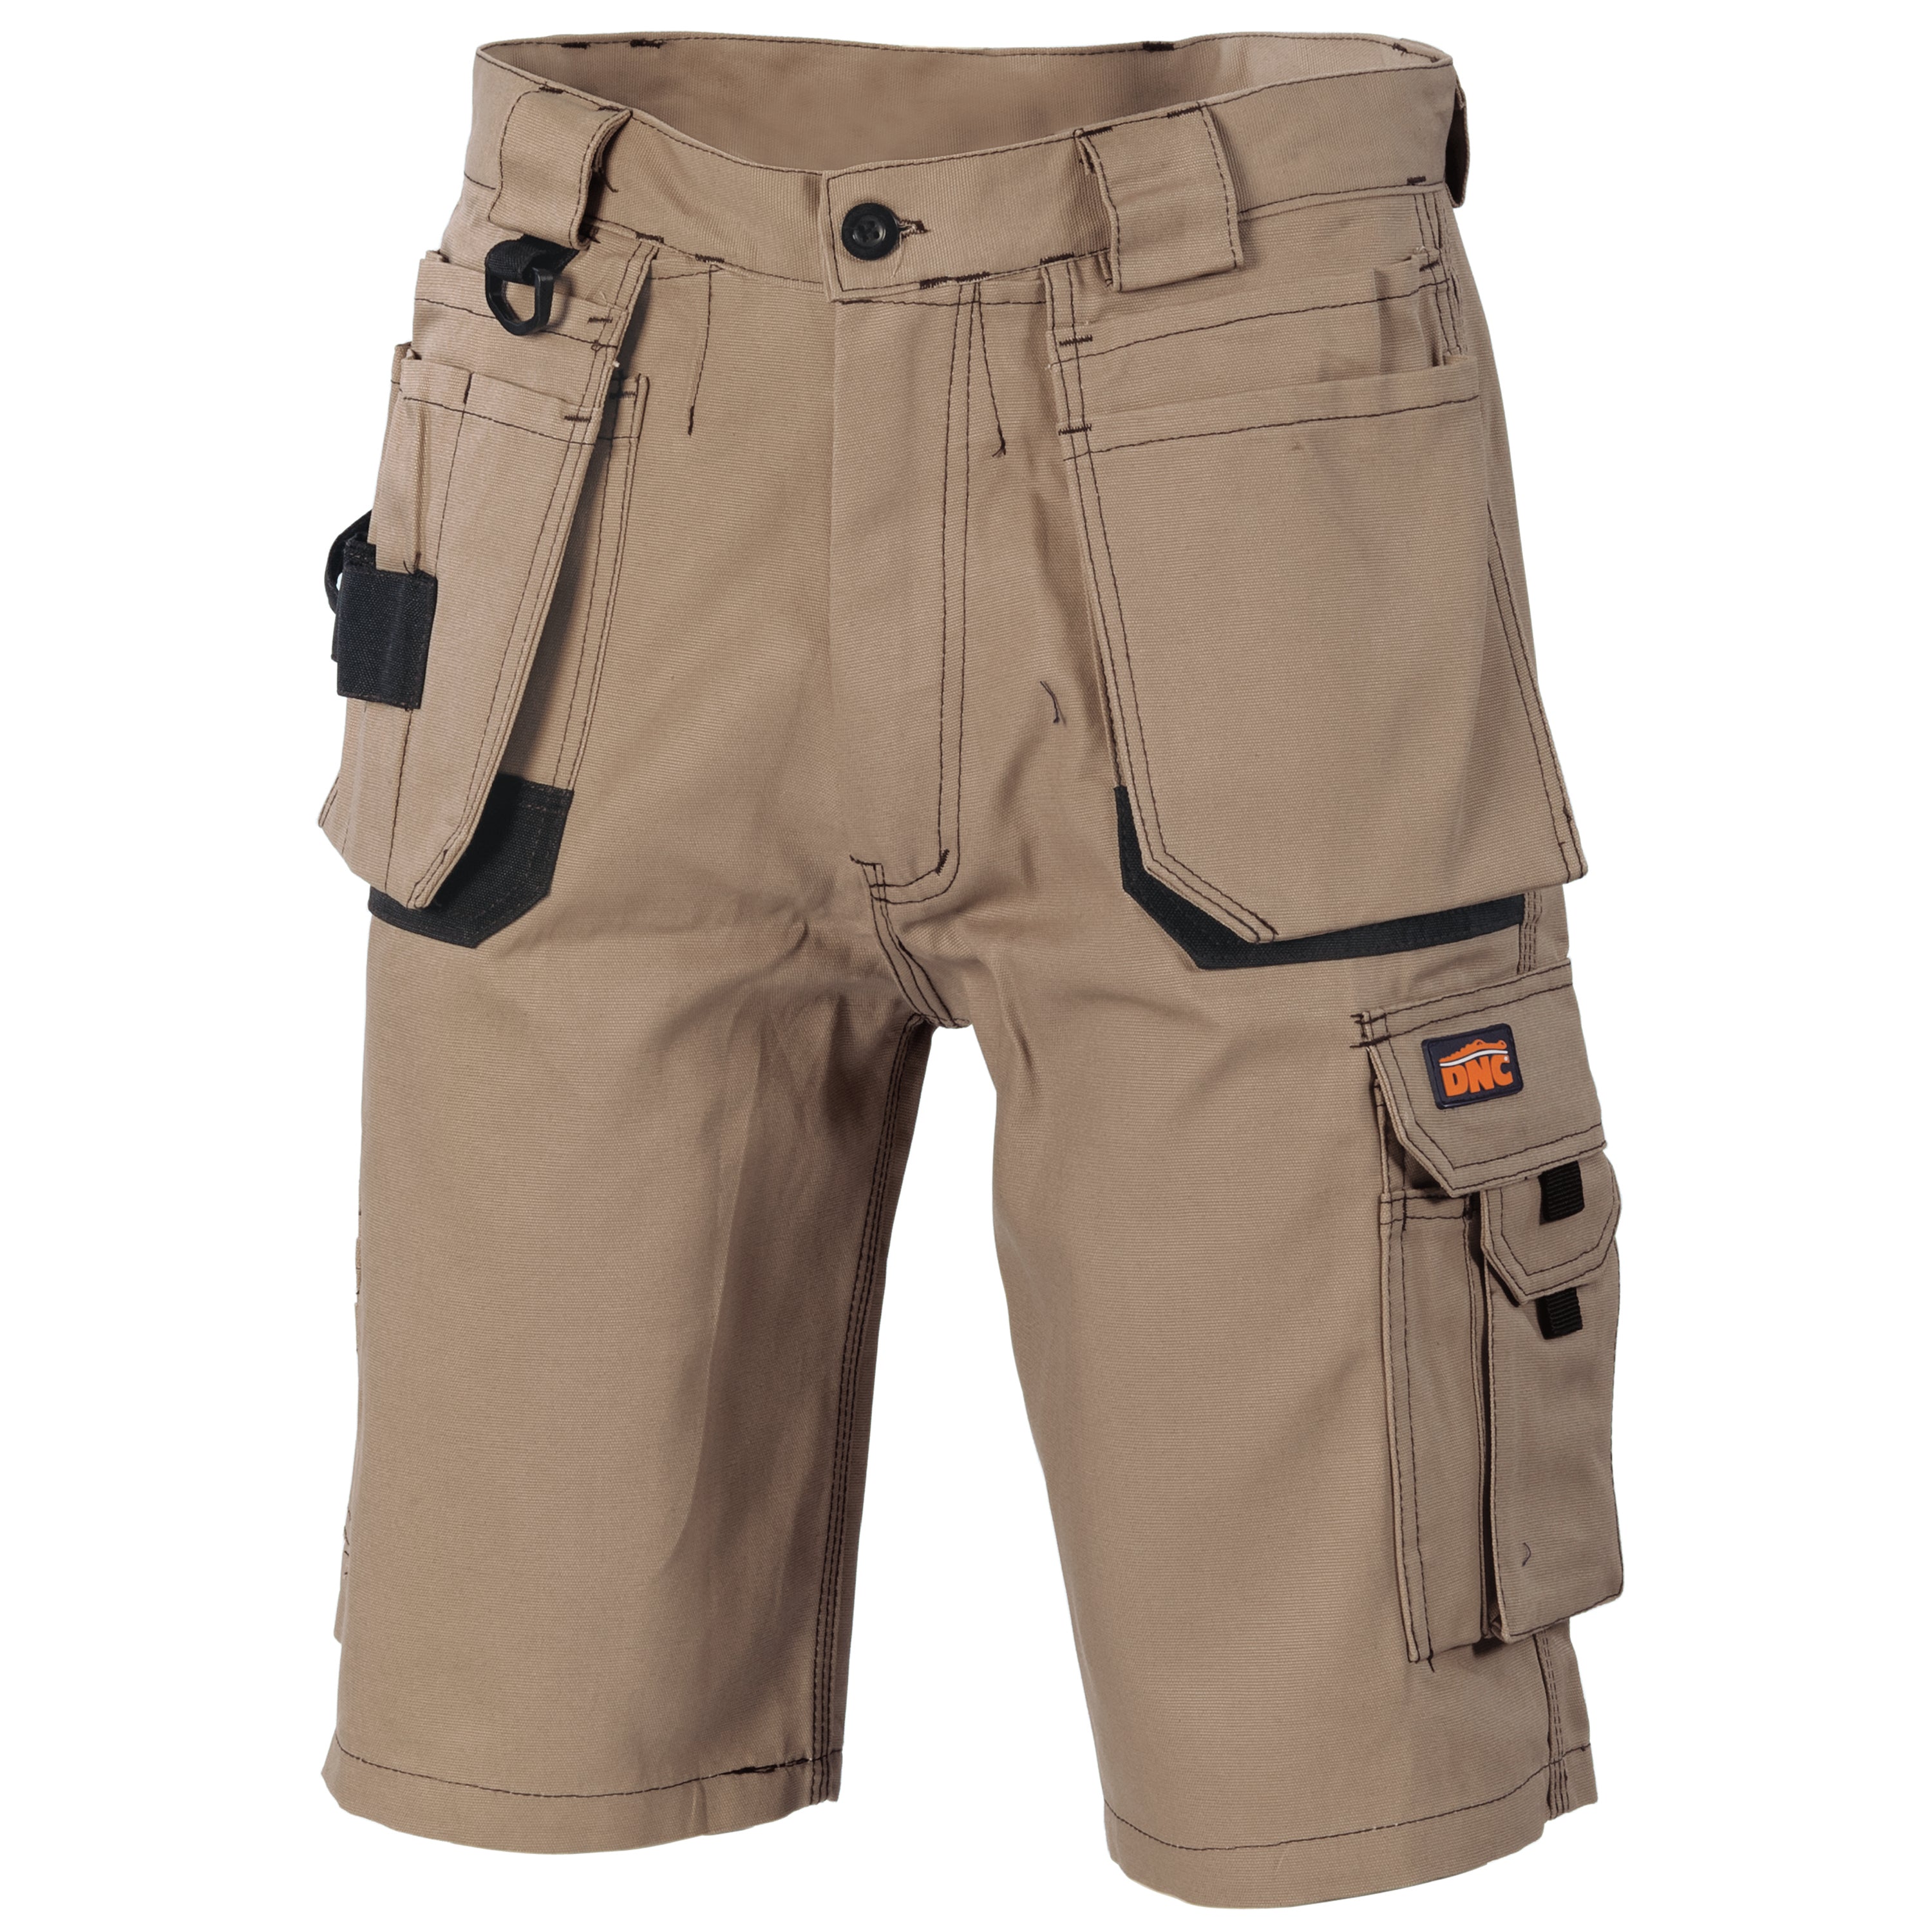 DNC 3336 Duratex Cotton Duck Weave Tradies Cargo Shorts with Tool Pocket